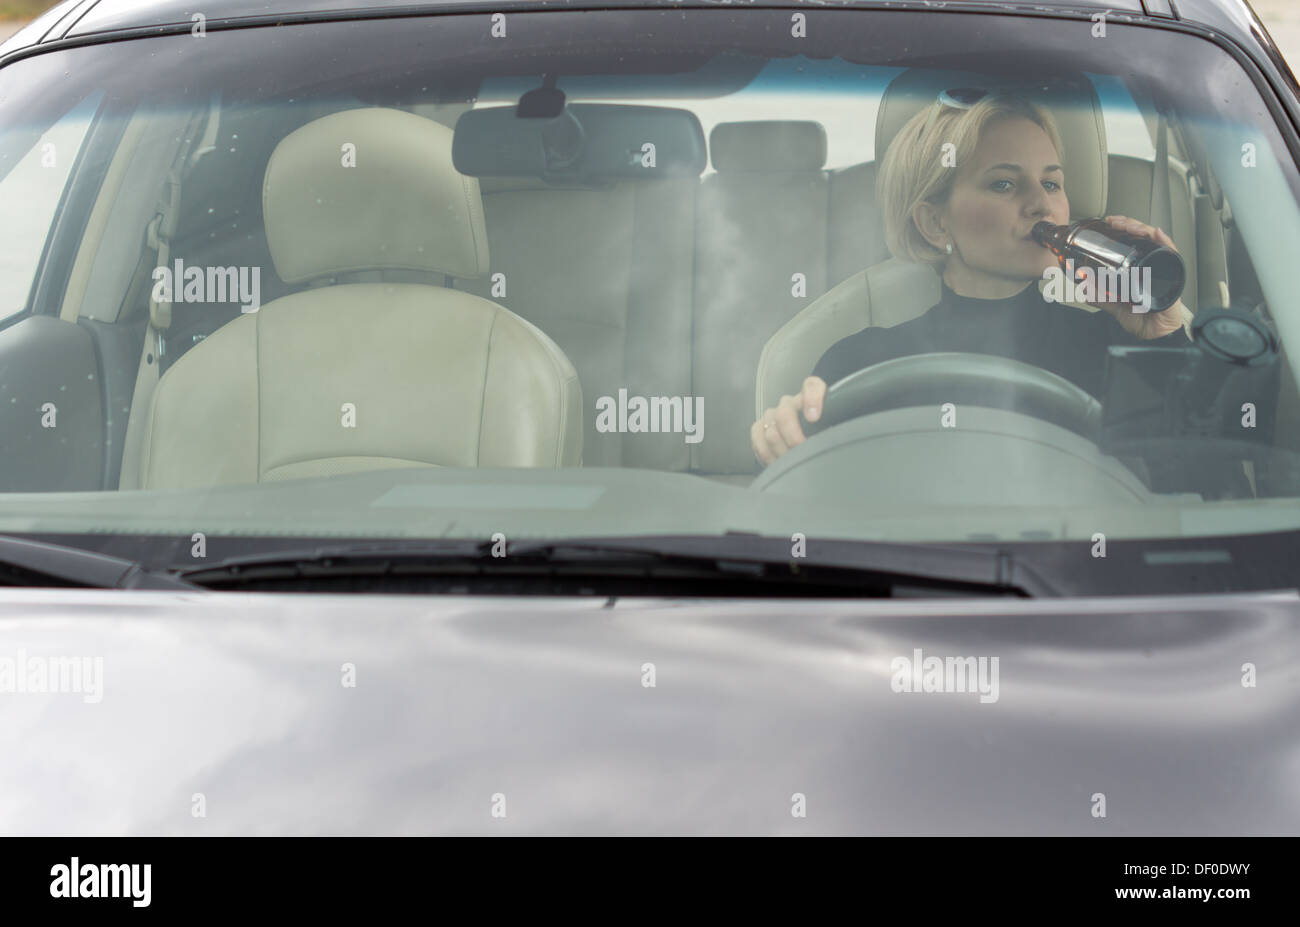 Female alcoholic sitting in her car drinking and driving as she gulps alcohol directly from the bottle, view through the front windscreen. Stock Photo